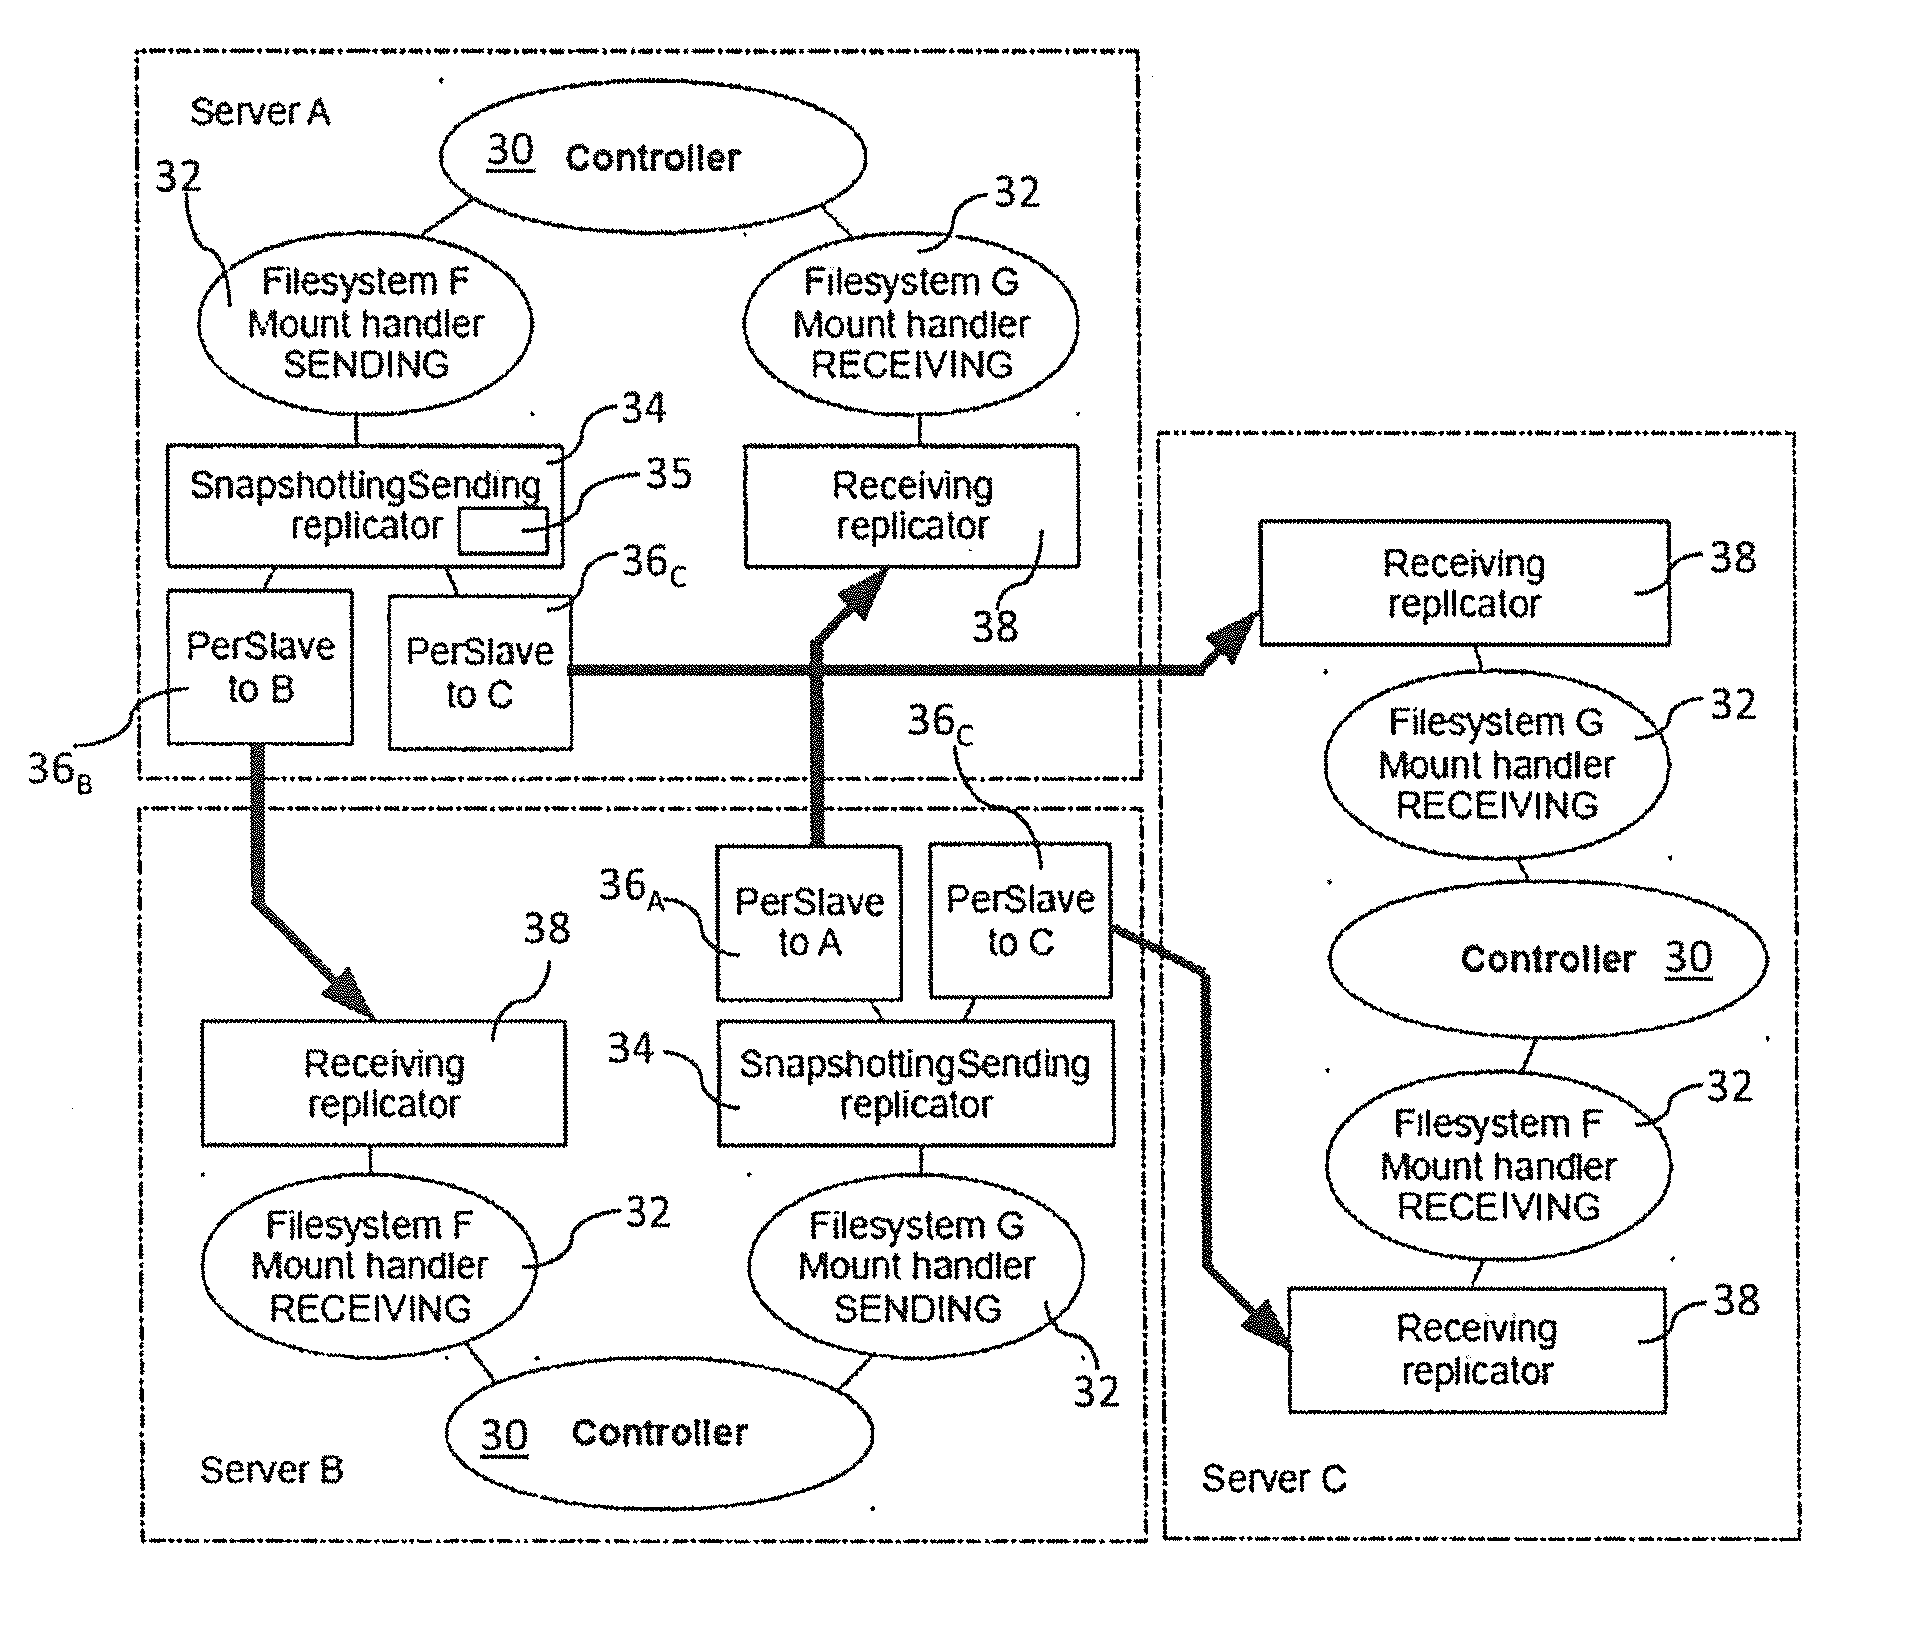 System for live-migration and automated recovery of applications in a distributed system